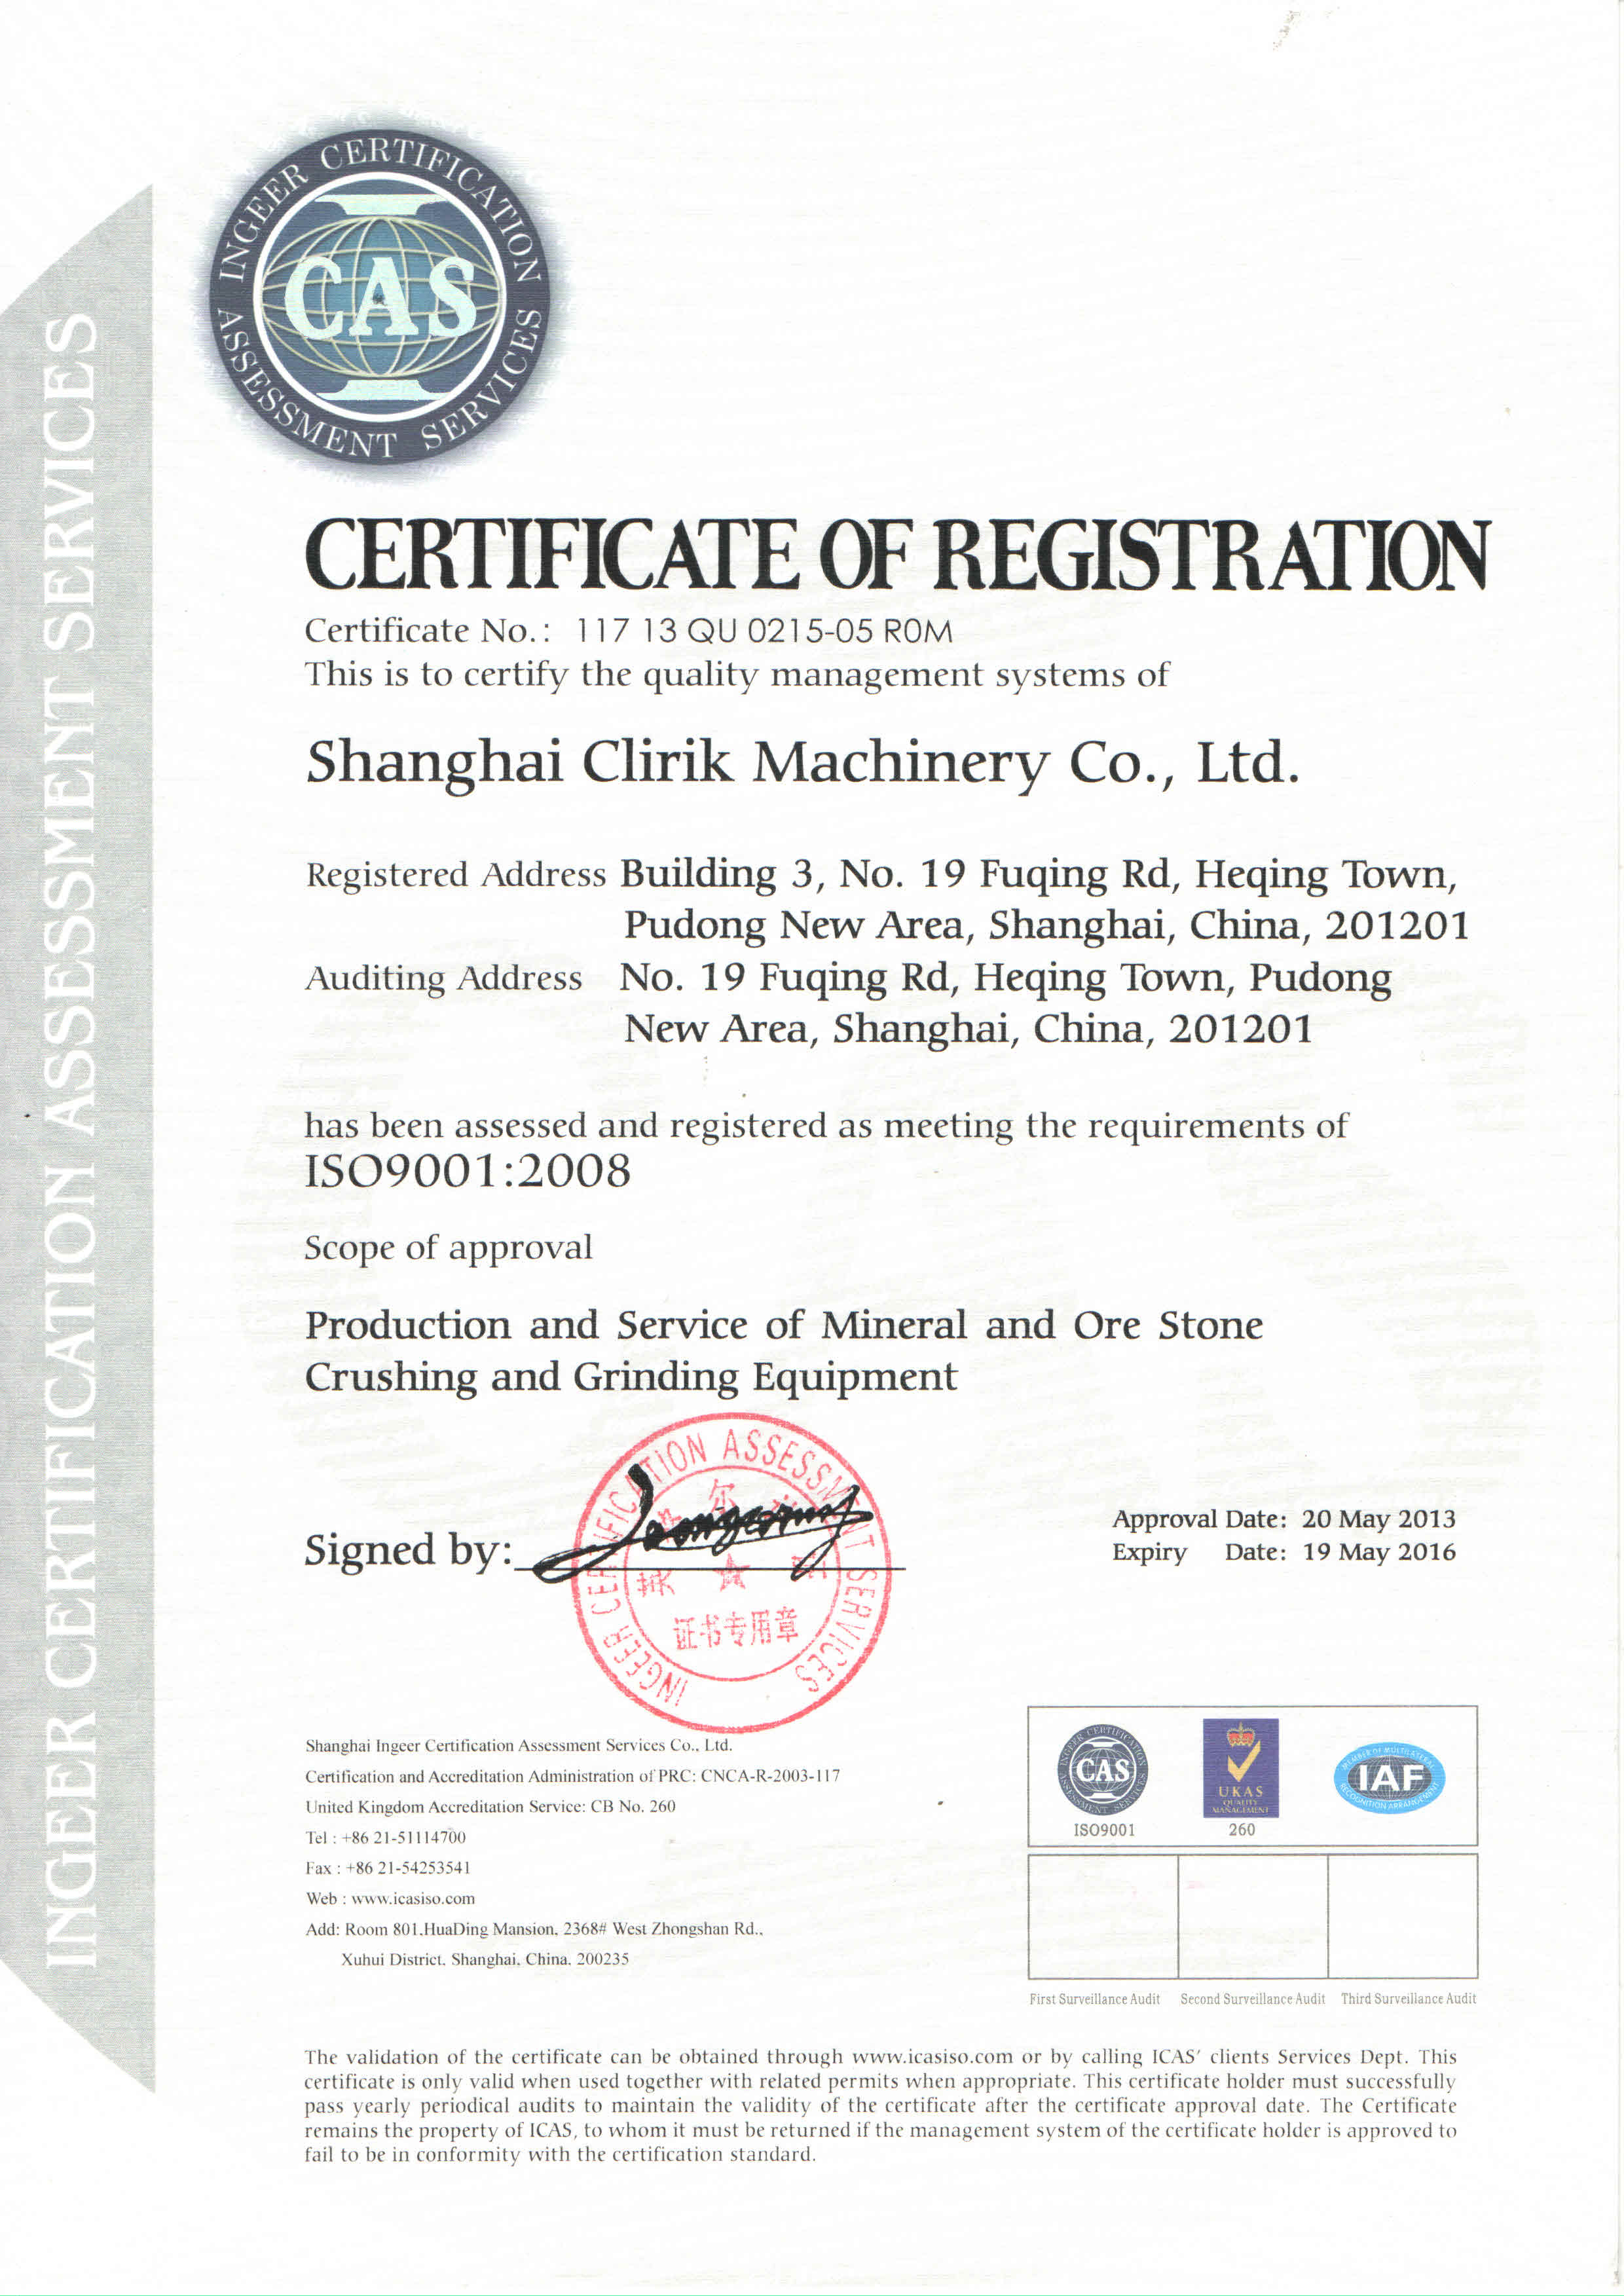 Congratulations Clirik Vertical Mills are up to the ISO9001:2008 